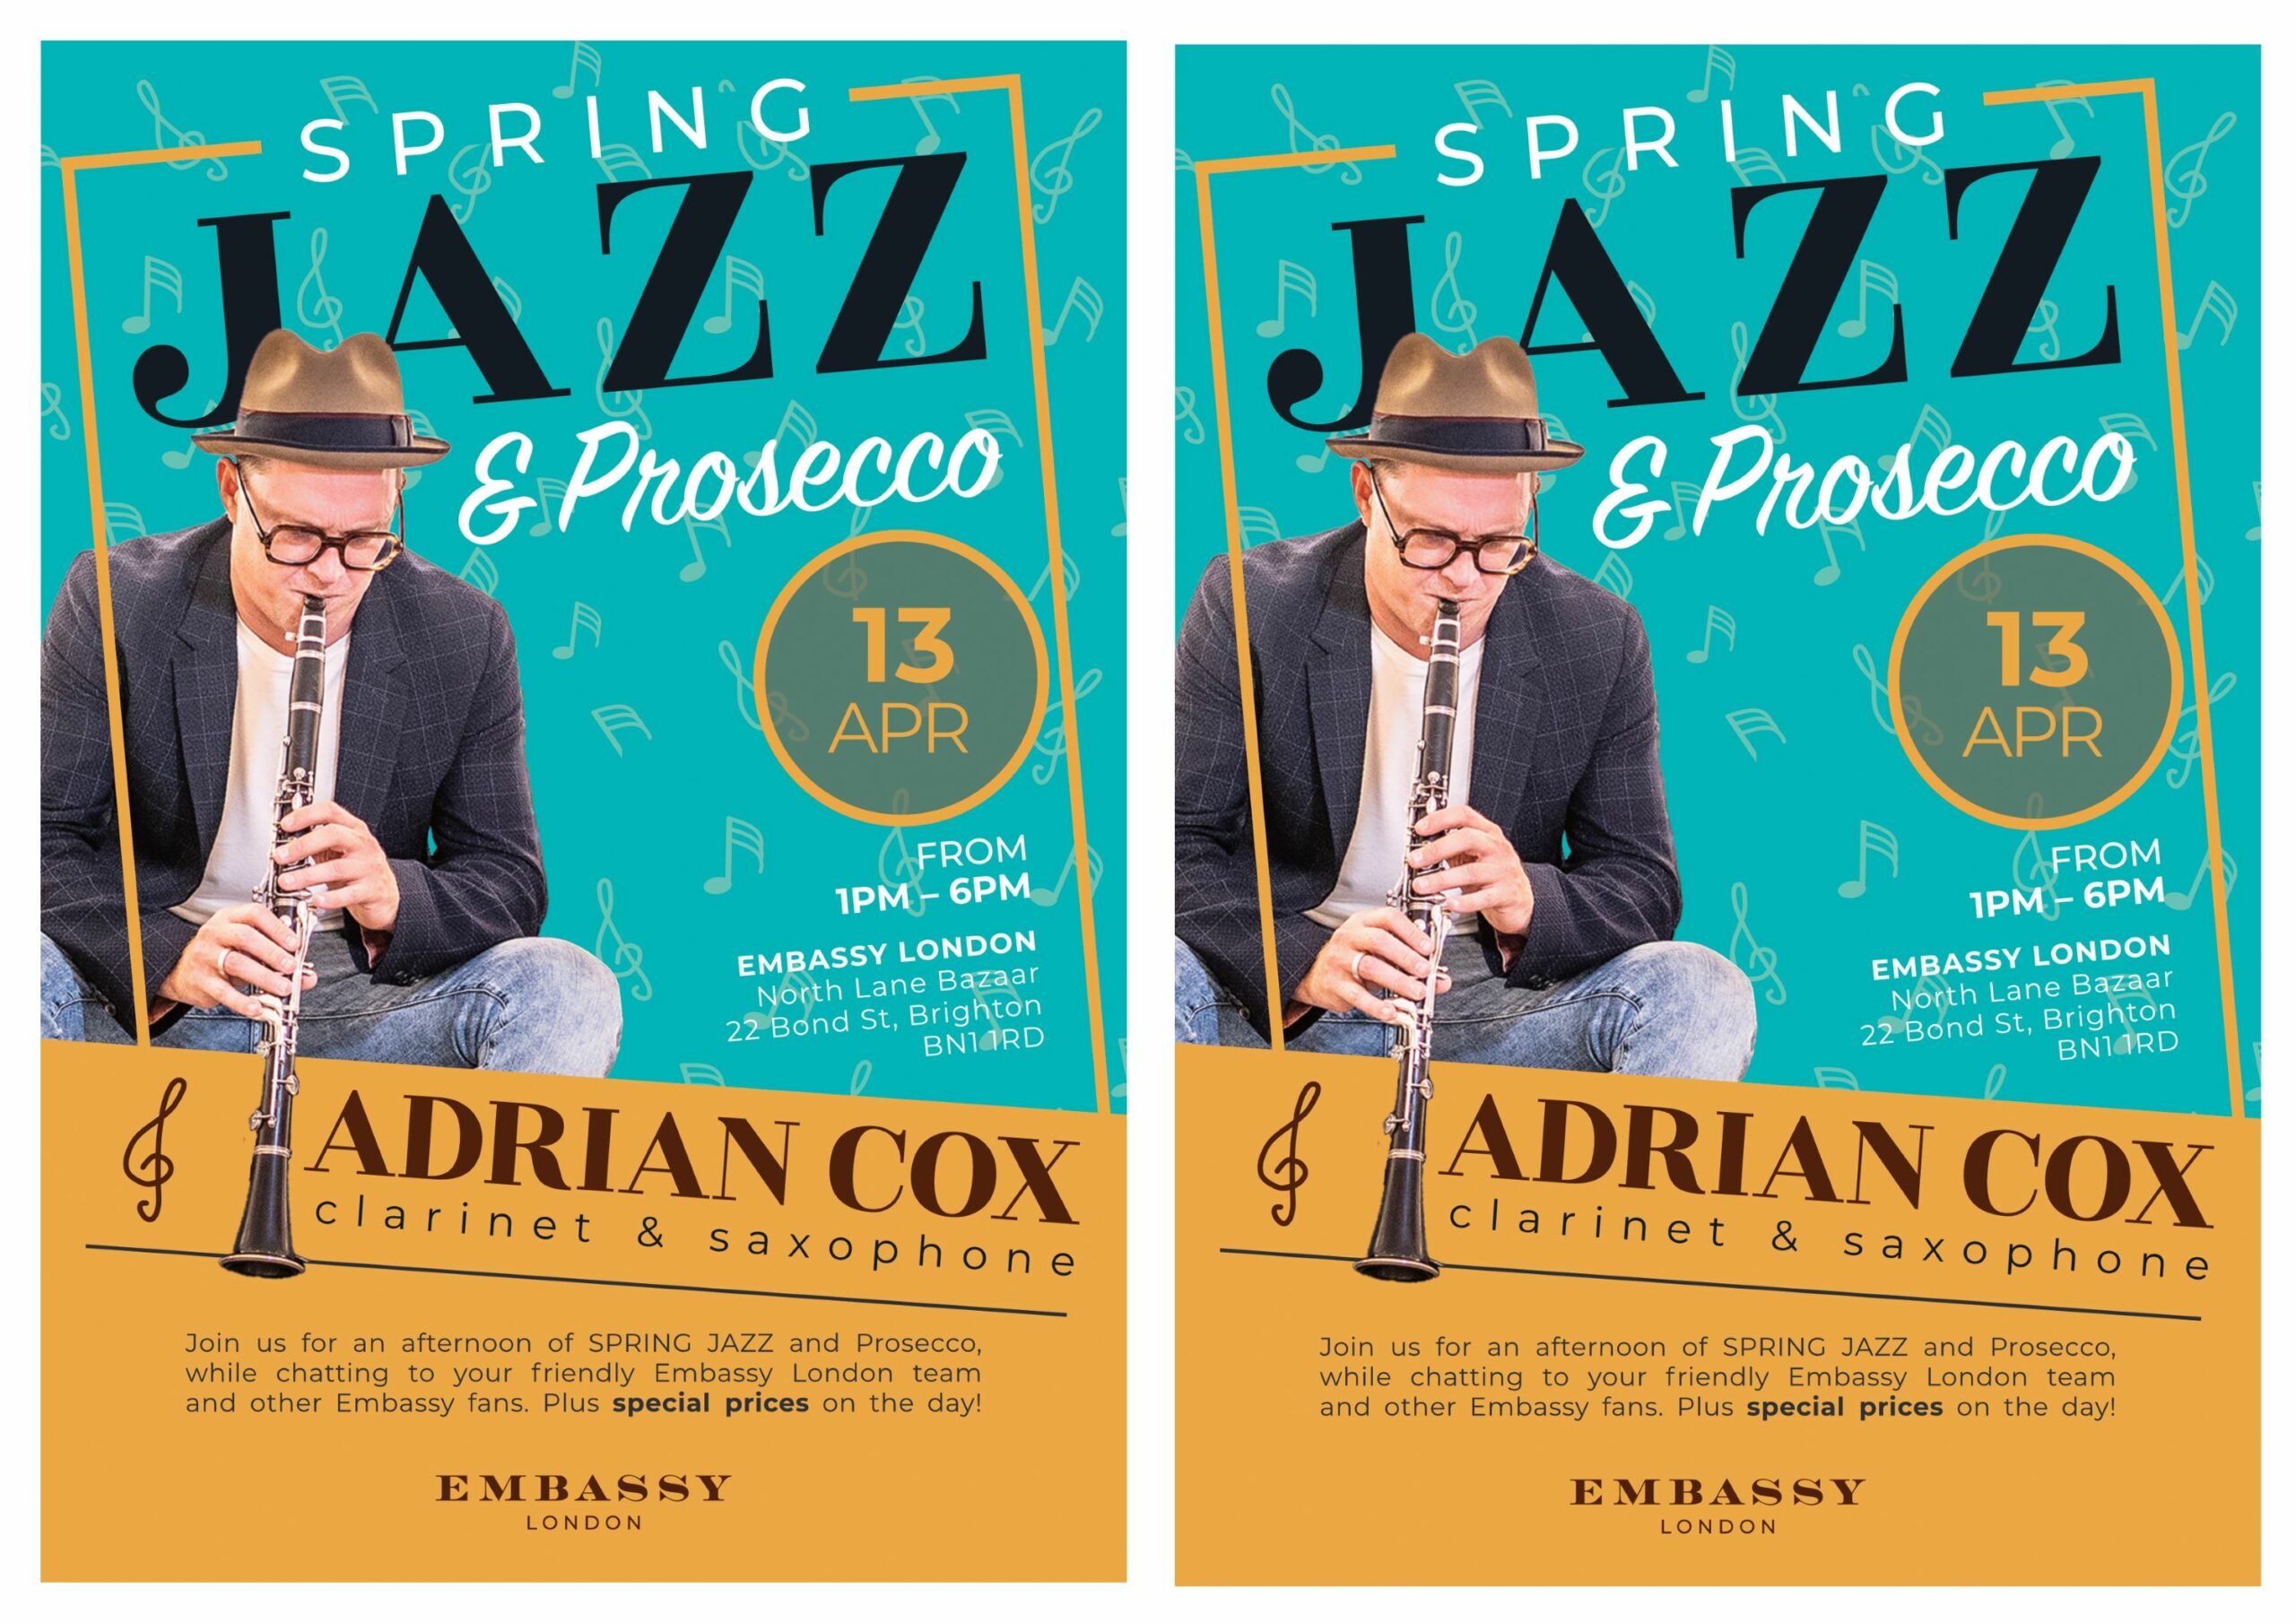 Image shows event flyer for Spring Jazz Afternoon at Embassy London store Brighton Bond Street